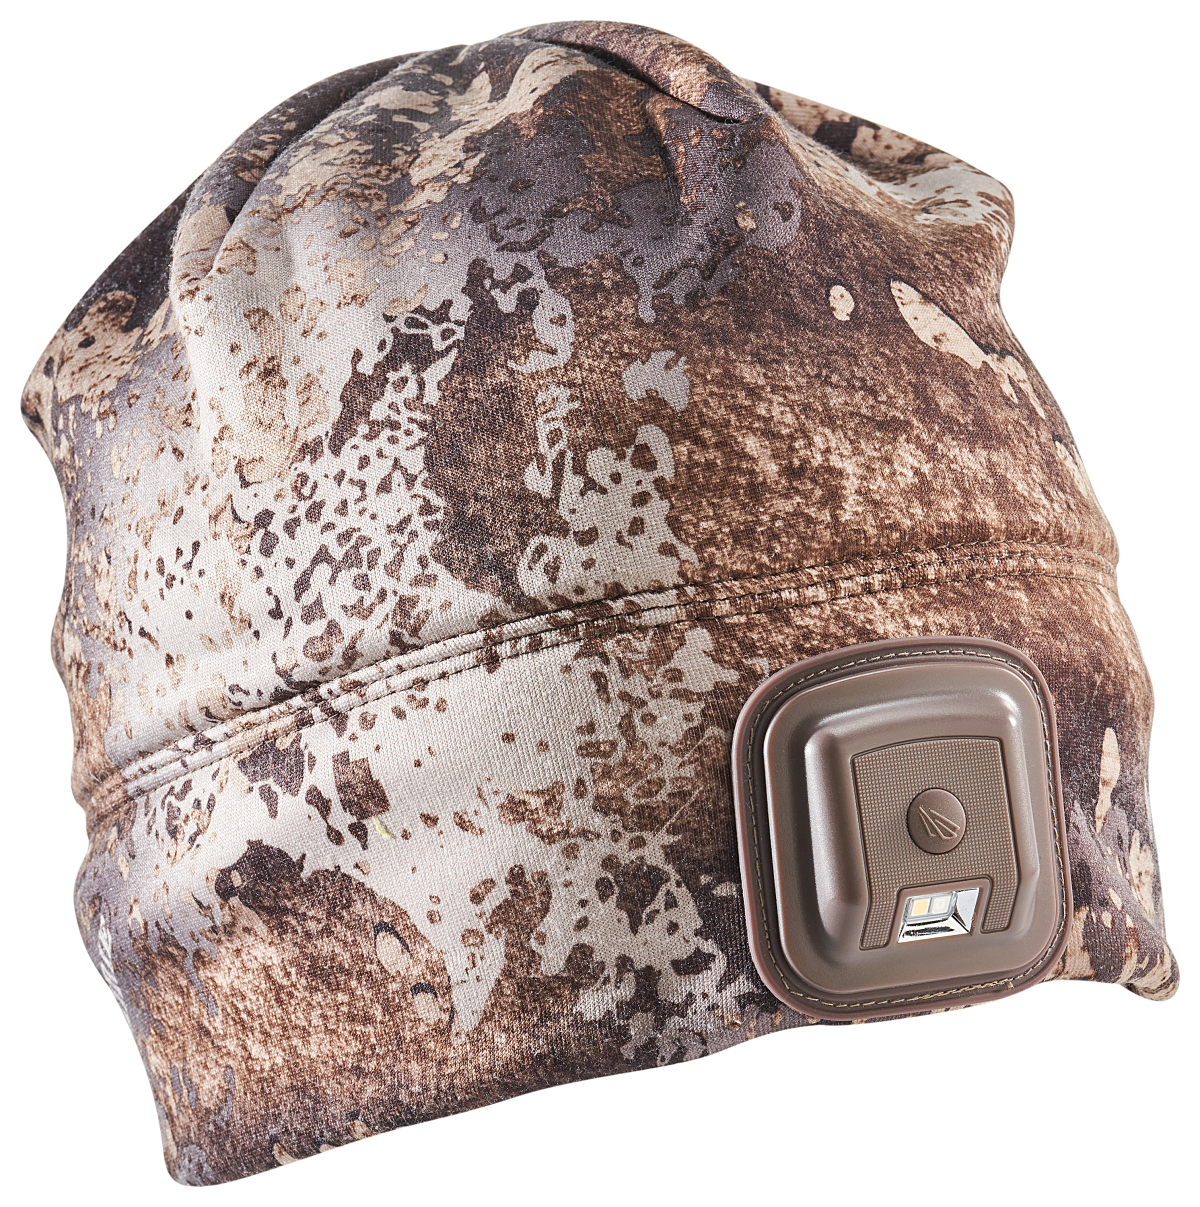 Cabela's Headlamp in a Hat 3.5 Rechargeable Lighted Beanie - TrueTimber Prairie